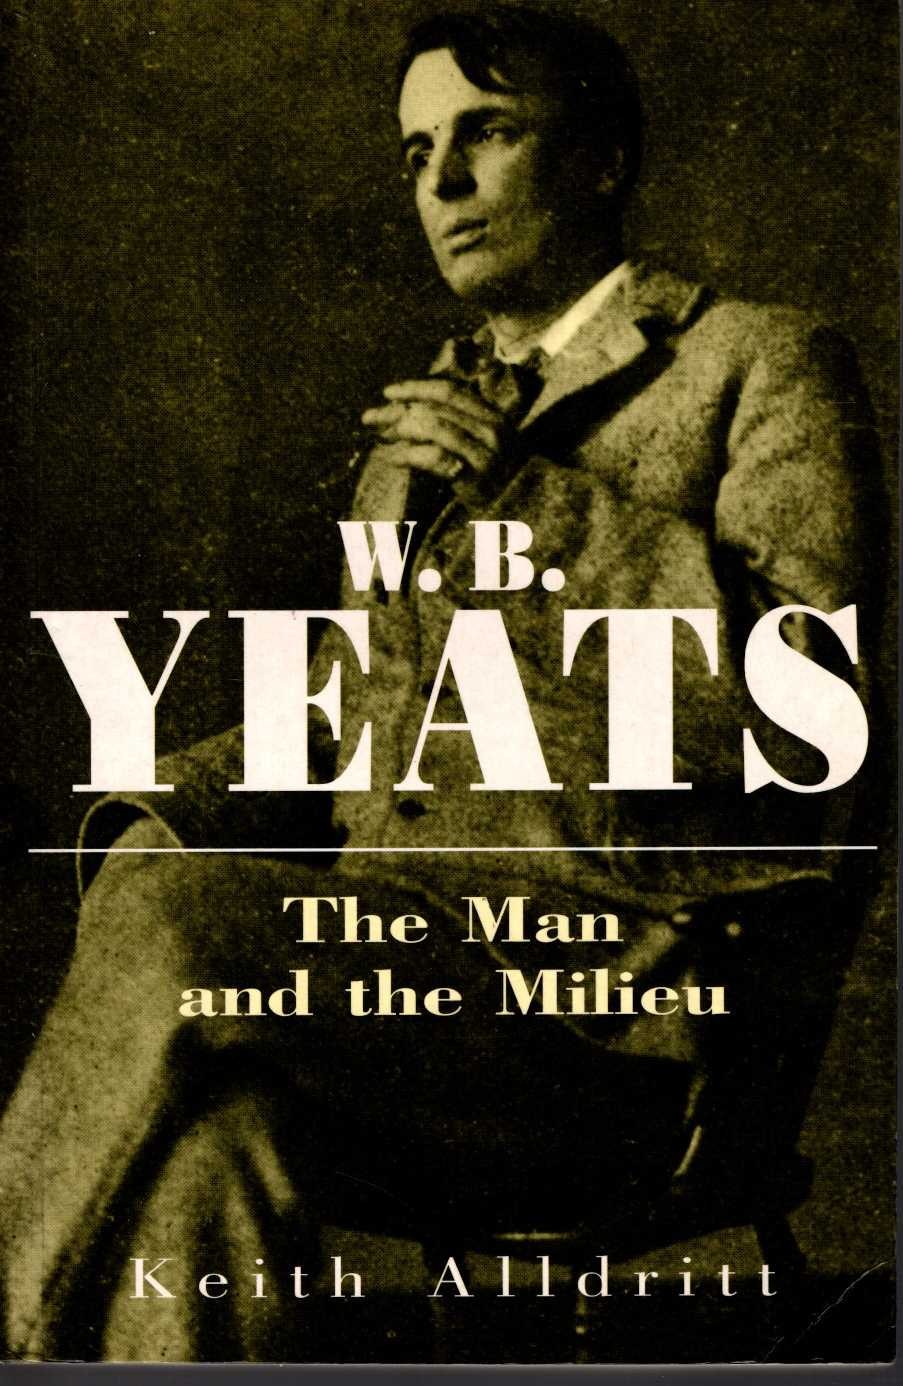 Keith Alldritt  W.B.YEATS. The Man and the Milieu (Biography) front book cover image